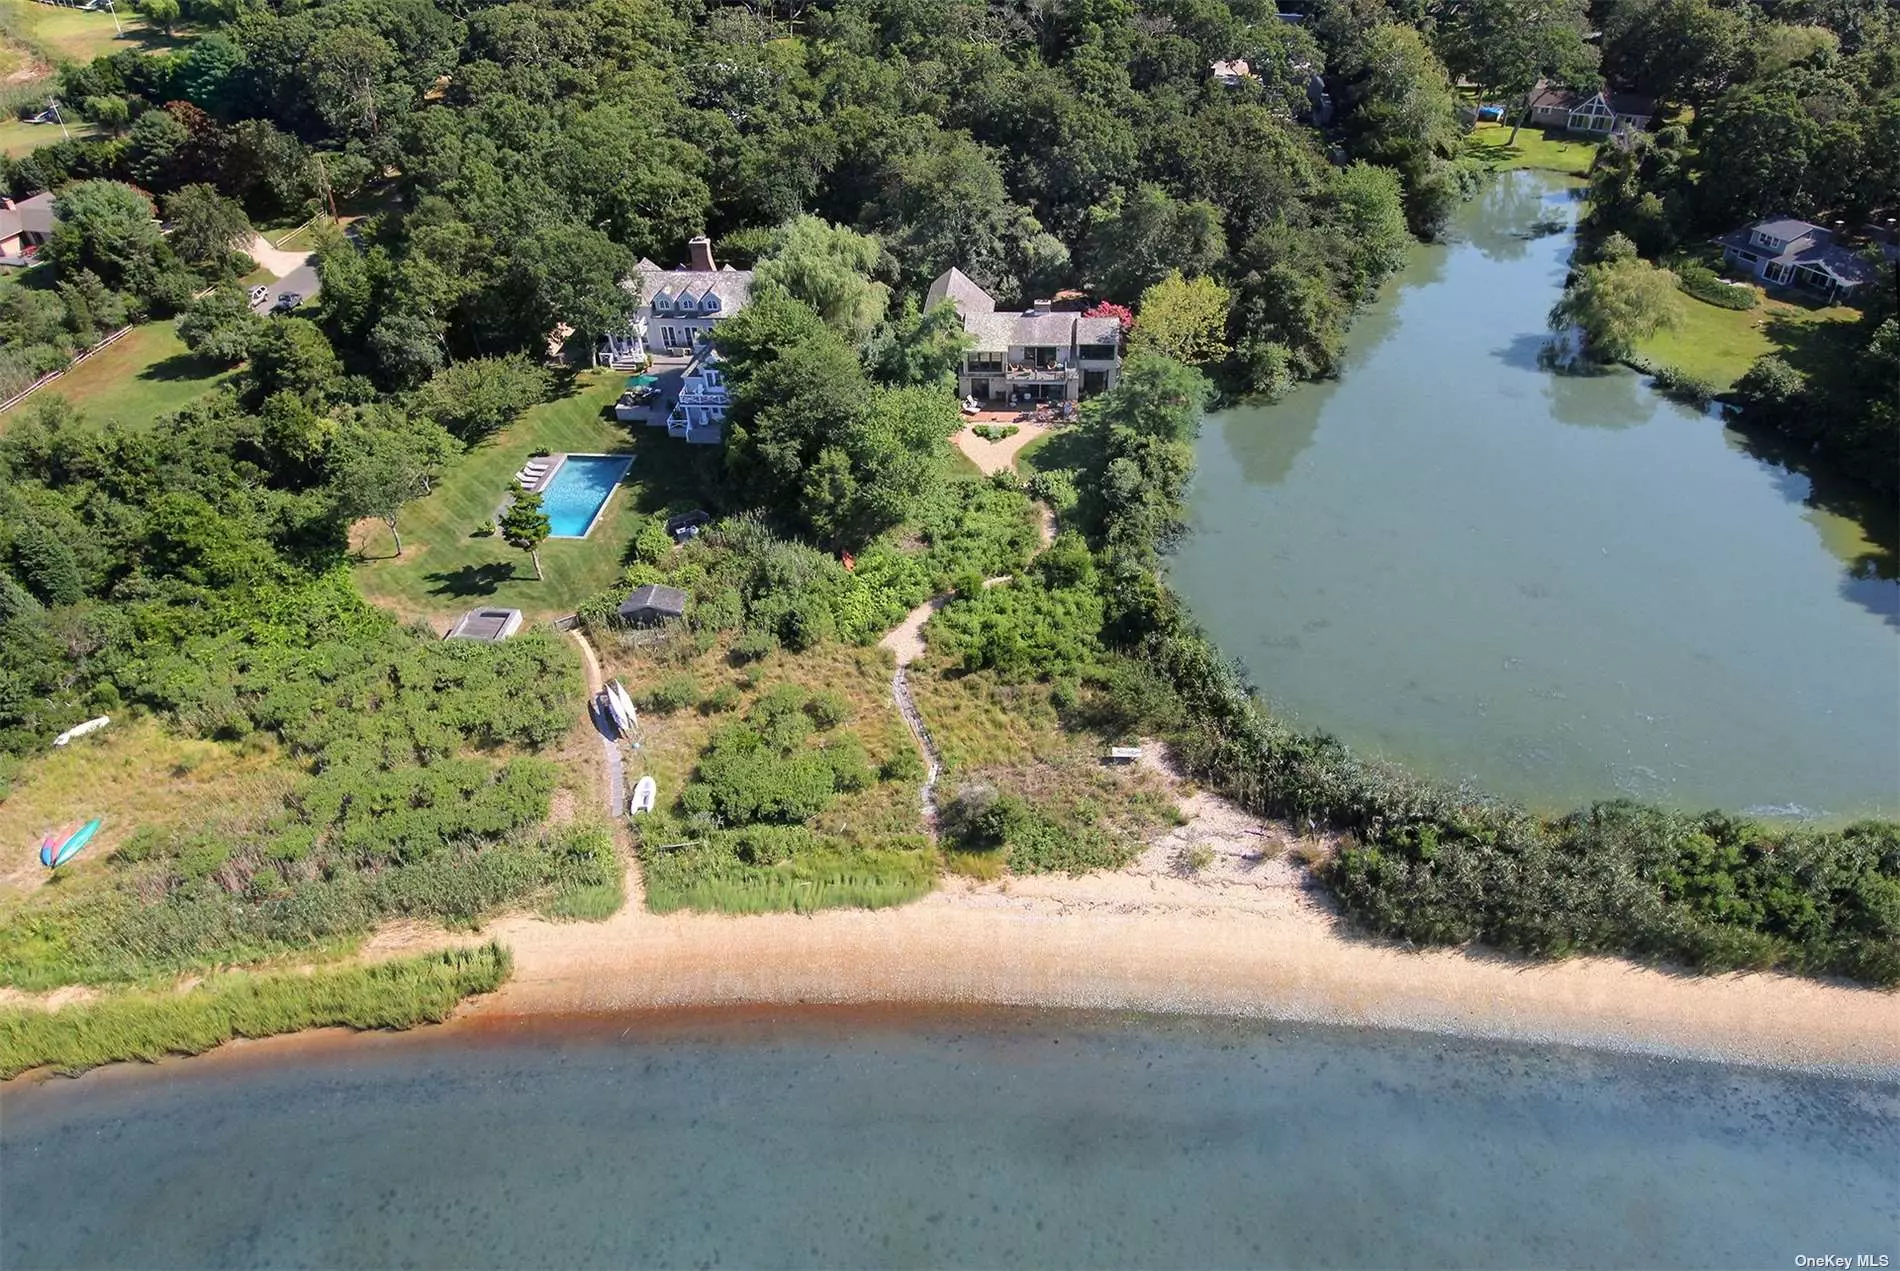 This beautiful waterfront home for sale in East Hampton features some of the best views of Three Mile Harbor and is one of the few properties with both breathtaking sunset and sunrise views. The 2, 300 square-foot house is sited on 1.2 acres and hosts four bedrooms and three baths. Exceptional details include a brick forecourt, exposed beams, expansive windows and multiple decks overlooking both an adjacent freshwater pond and the Harbor. The first floor features 2 bedrooms, one bath, a living room with brick fireplace, and kitchen with dining area. The second floor has the master suite, with the bathroom featuring a heavenly steam shower and one additional bedroom and bath. Outside, a scenic path leads to a wide sandy beach on Three Mile Harbor, where kayaks, paddleboards, and small boats can easily be launched. A unique oasis on the water with plenty of wildlife.